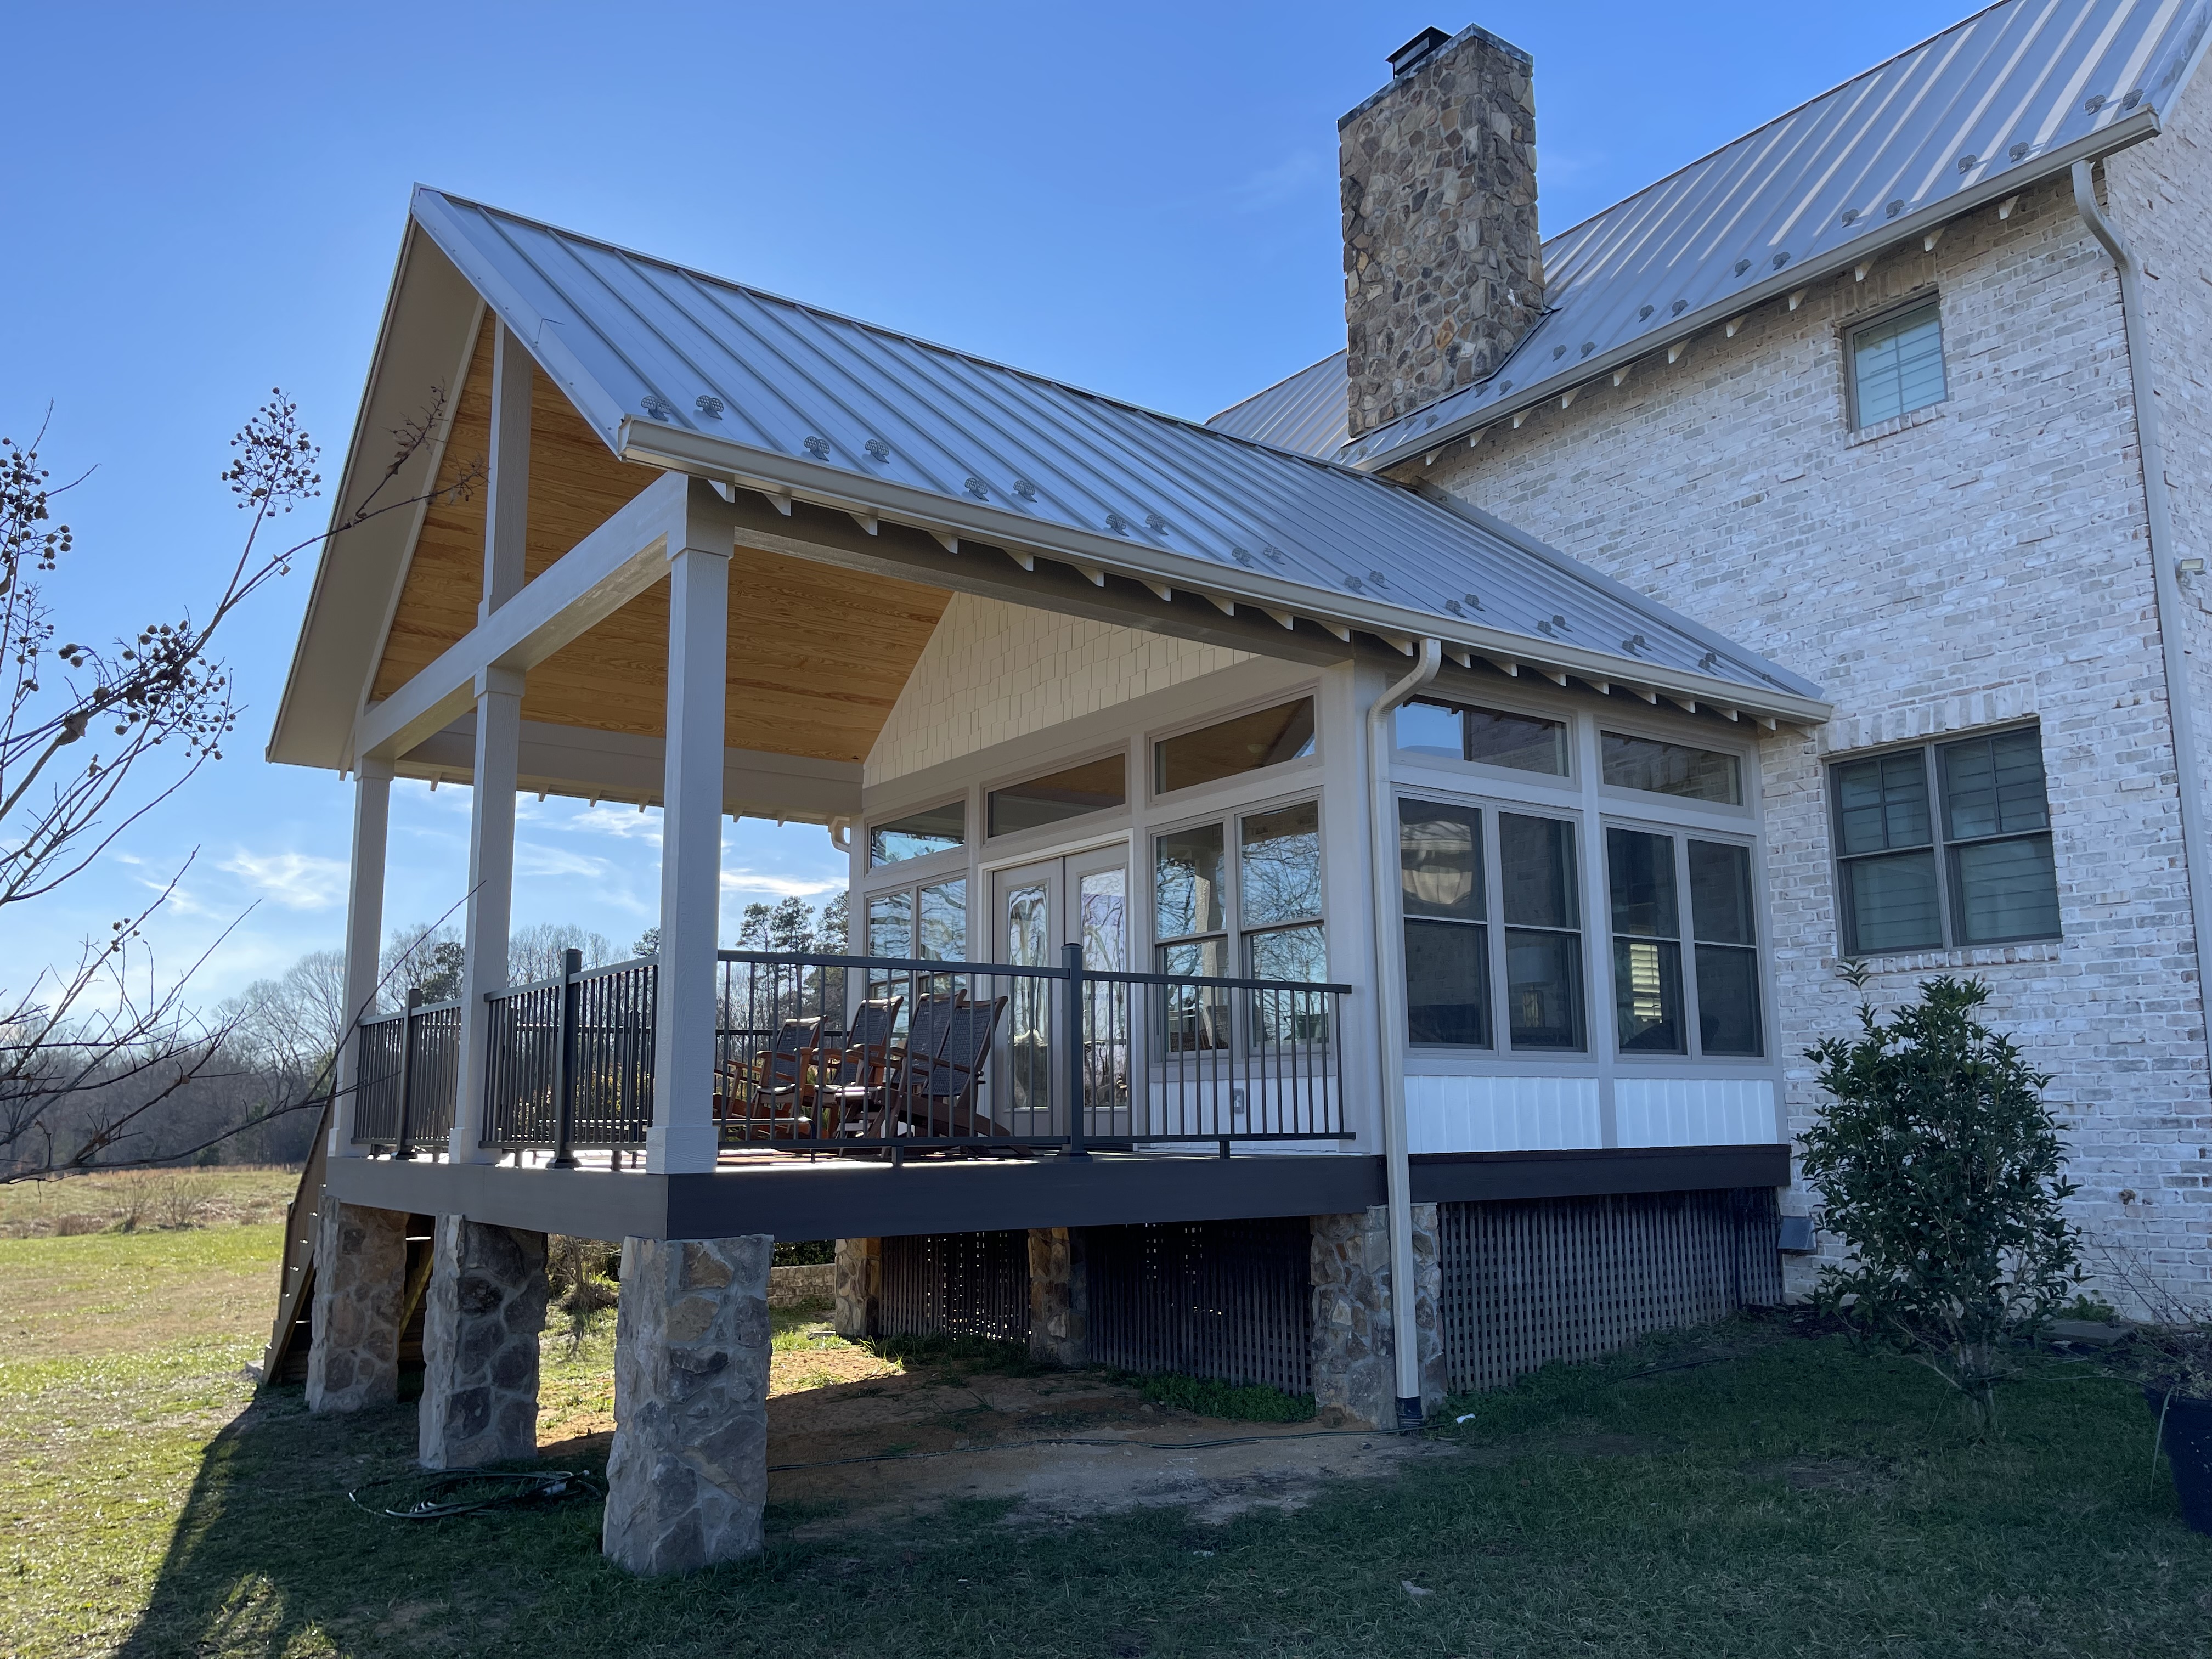 Converted Sunroom and Deck with Covered Porch Project in Summerfield, NC